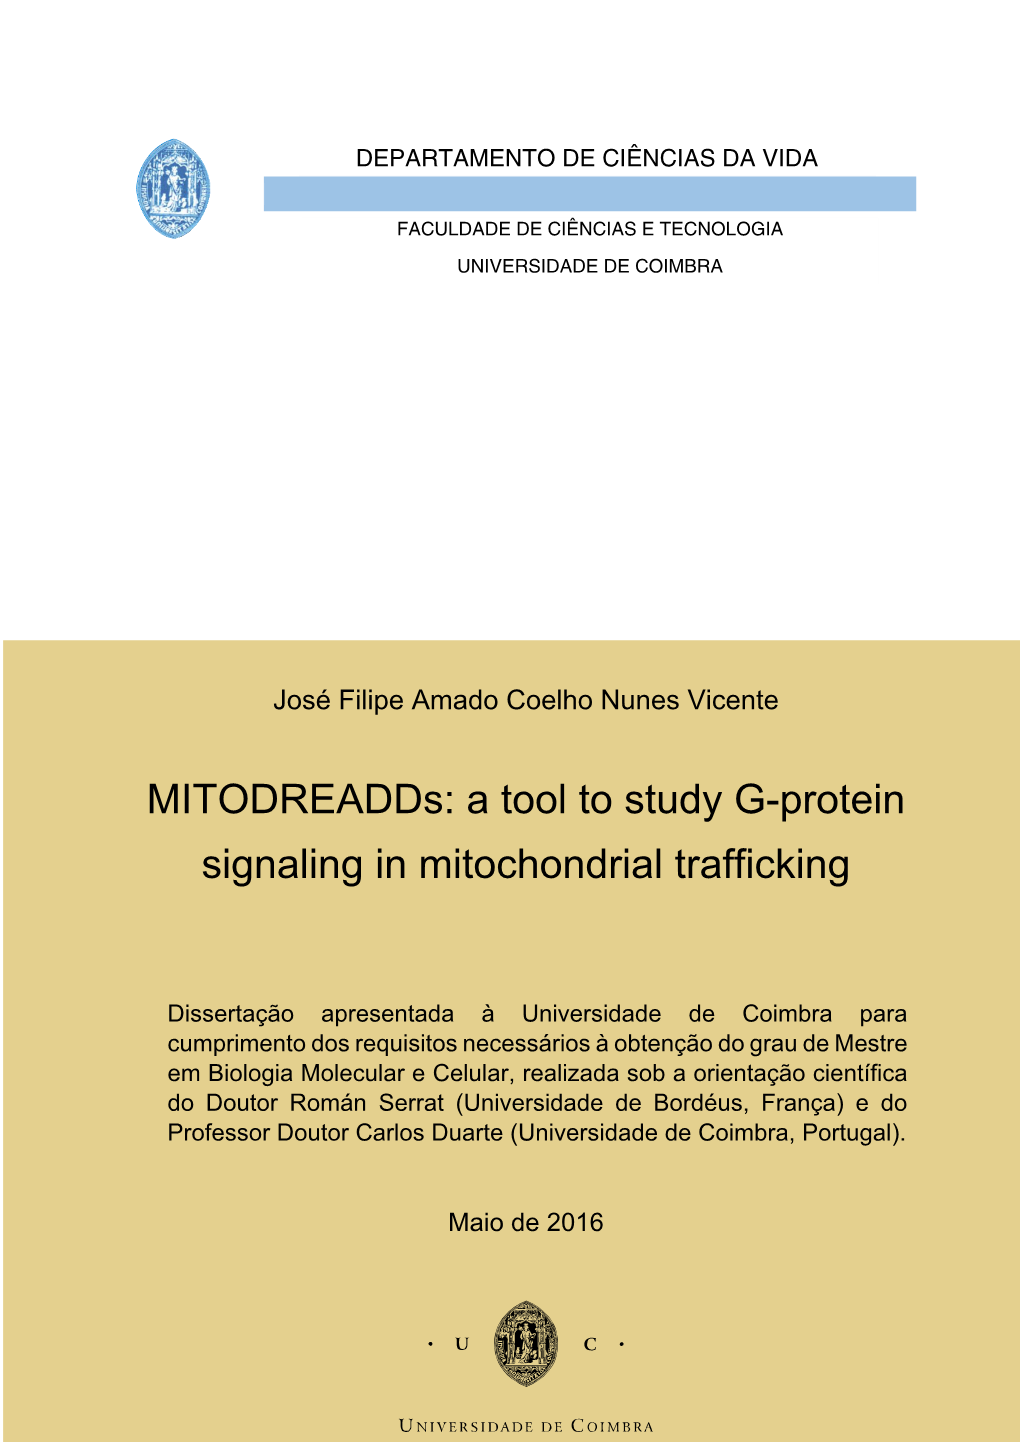 A Tool to Study G-Protein Signaling in Mitochondrial Trafficking